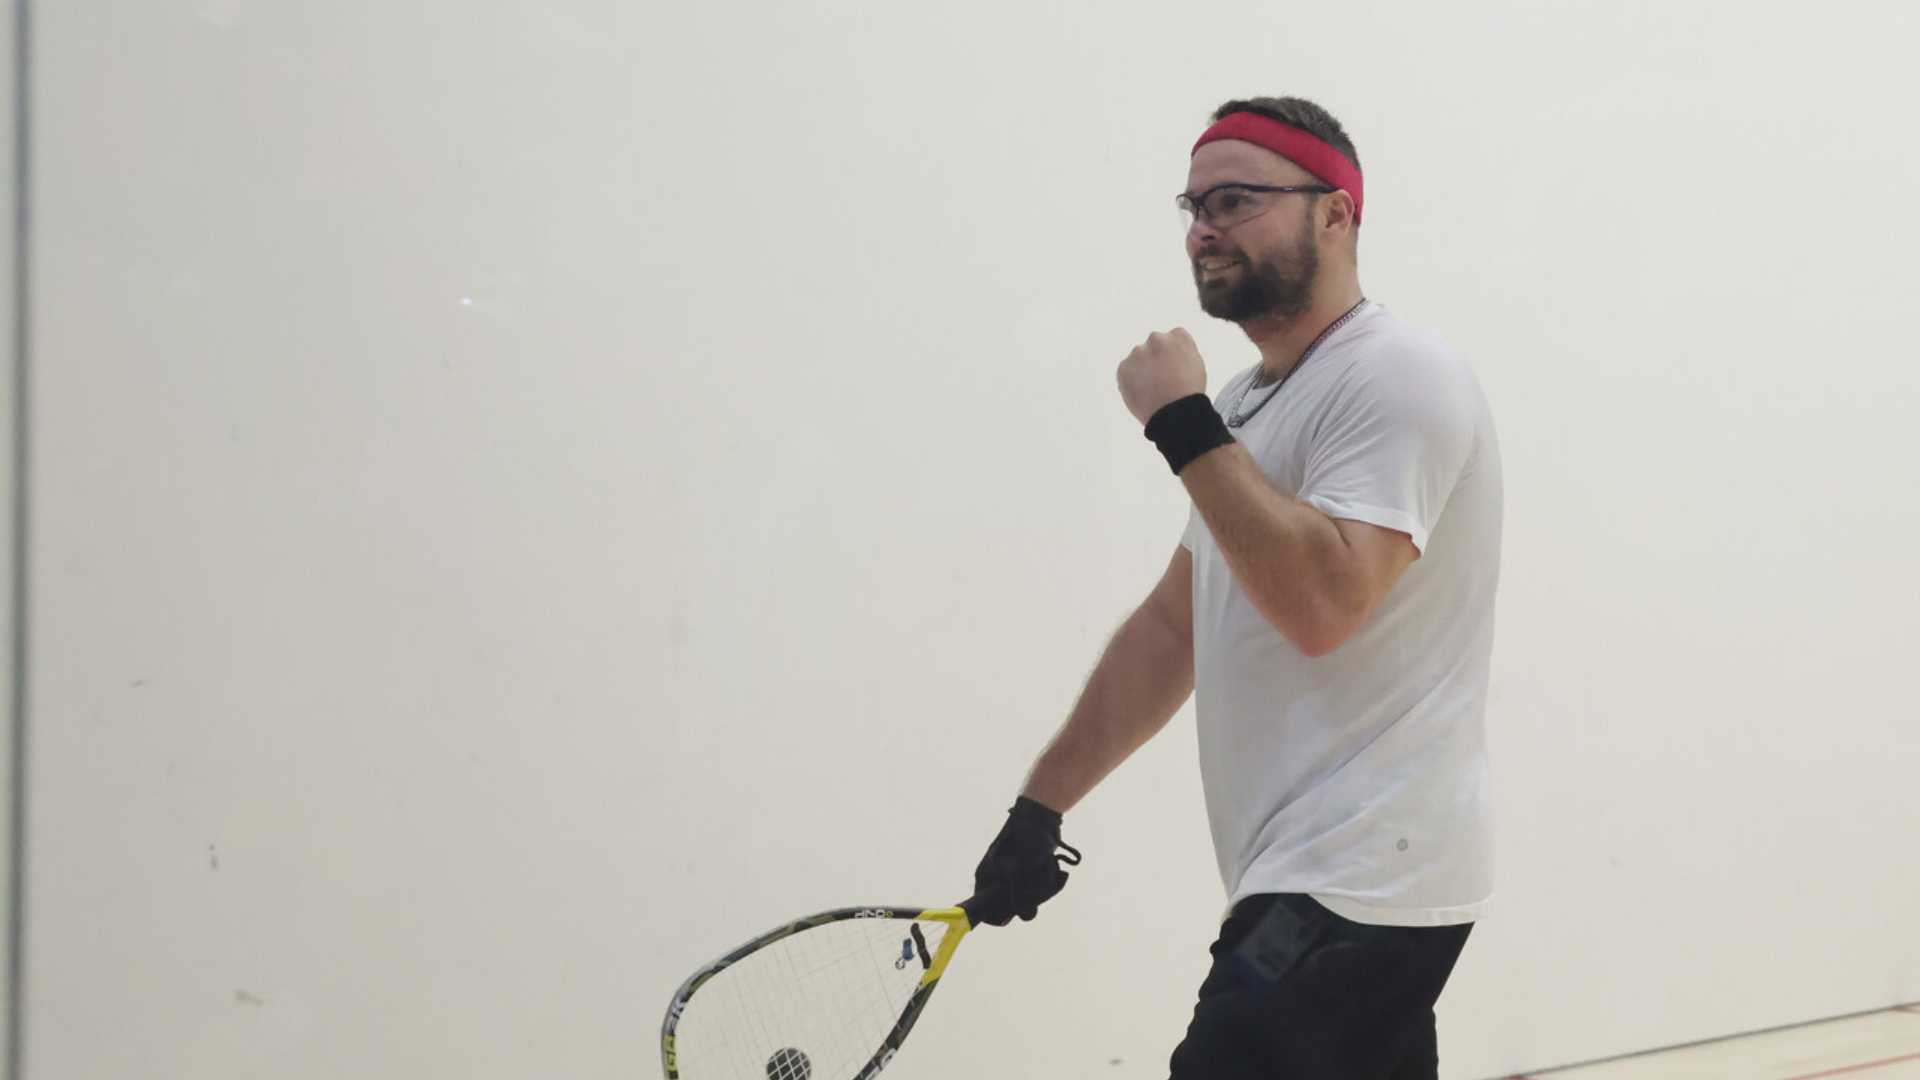 Racquetball: Bolivia and Canada to play the team final